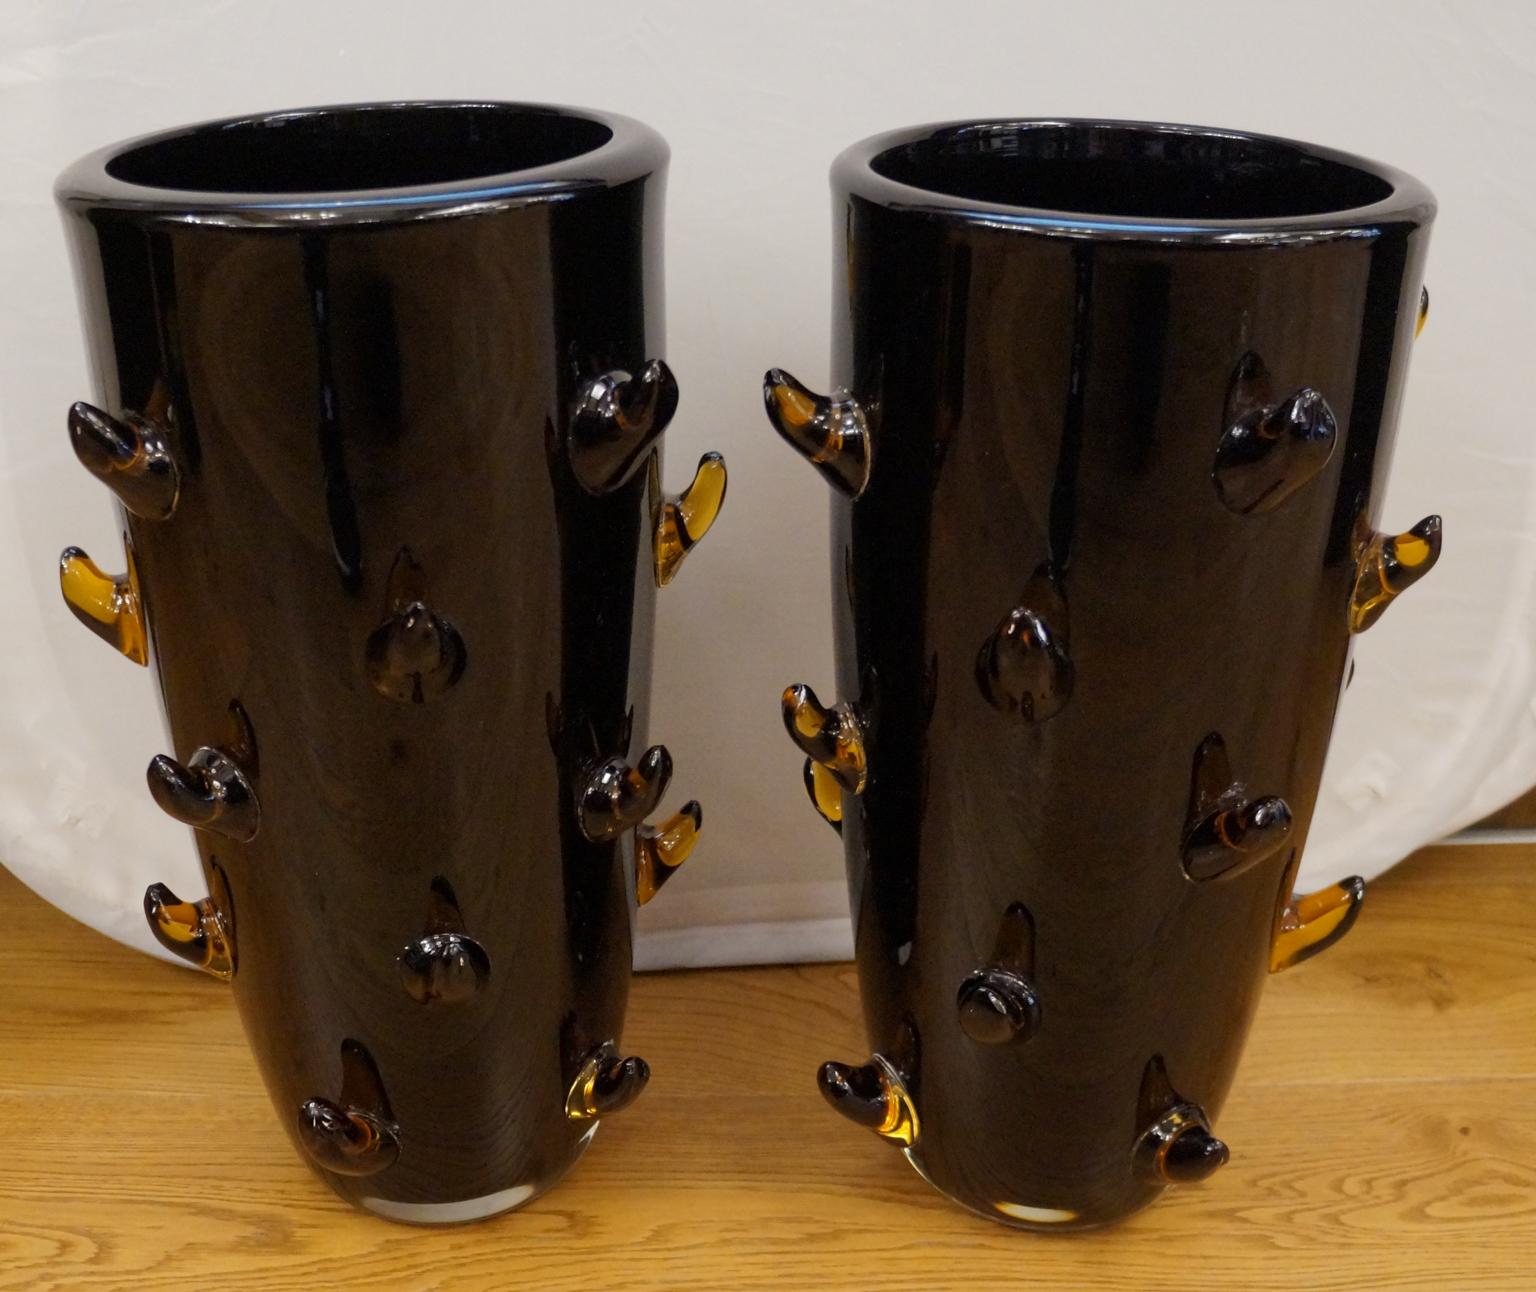 Toso Mid-Century Modern Black Amber Pair of Murano Glass Vases Signed Jars, 1988 For Sale 12